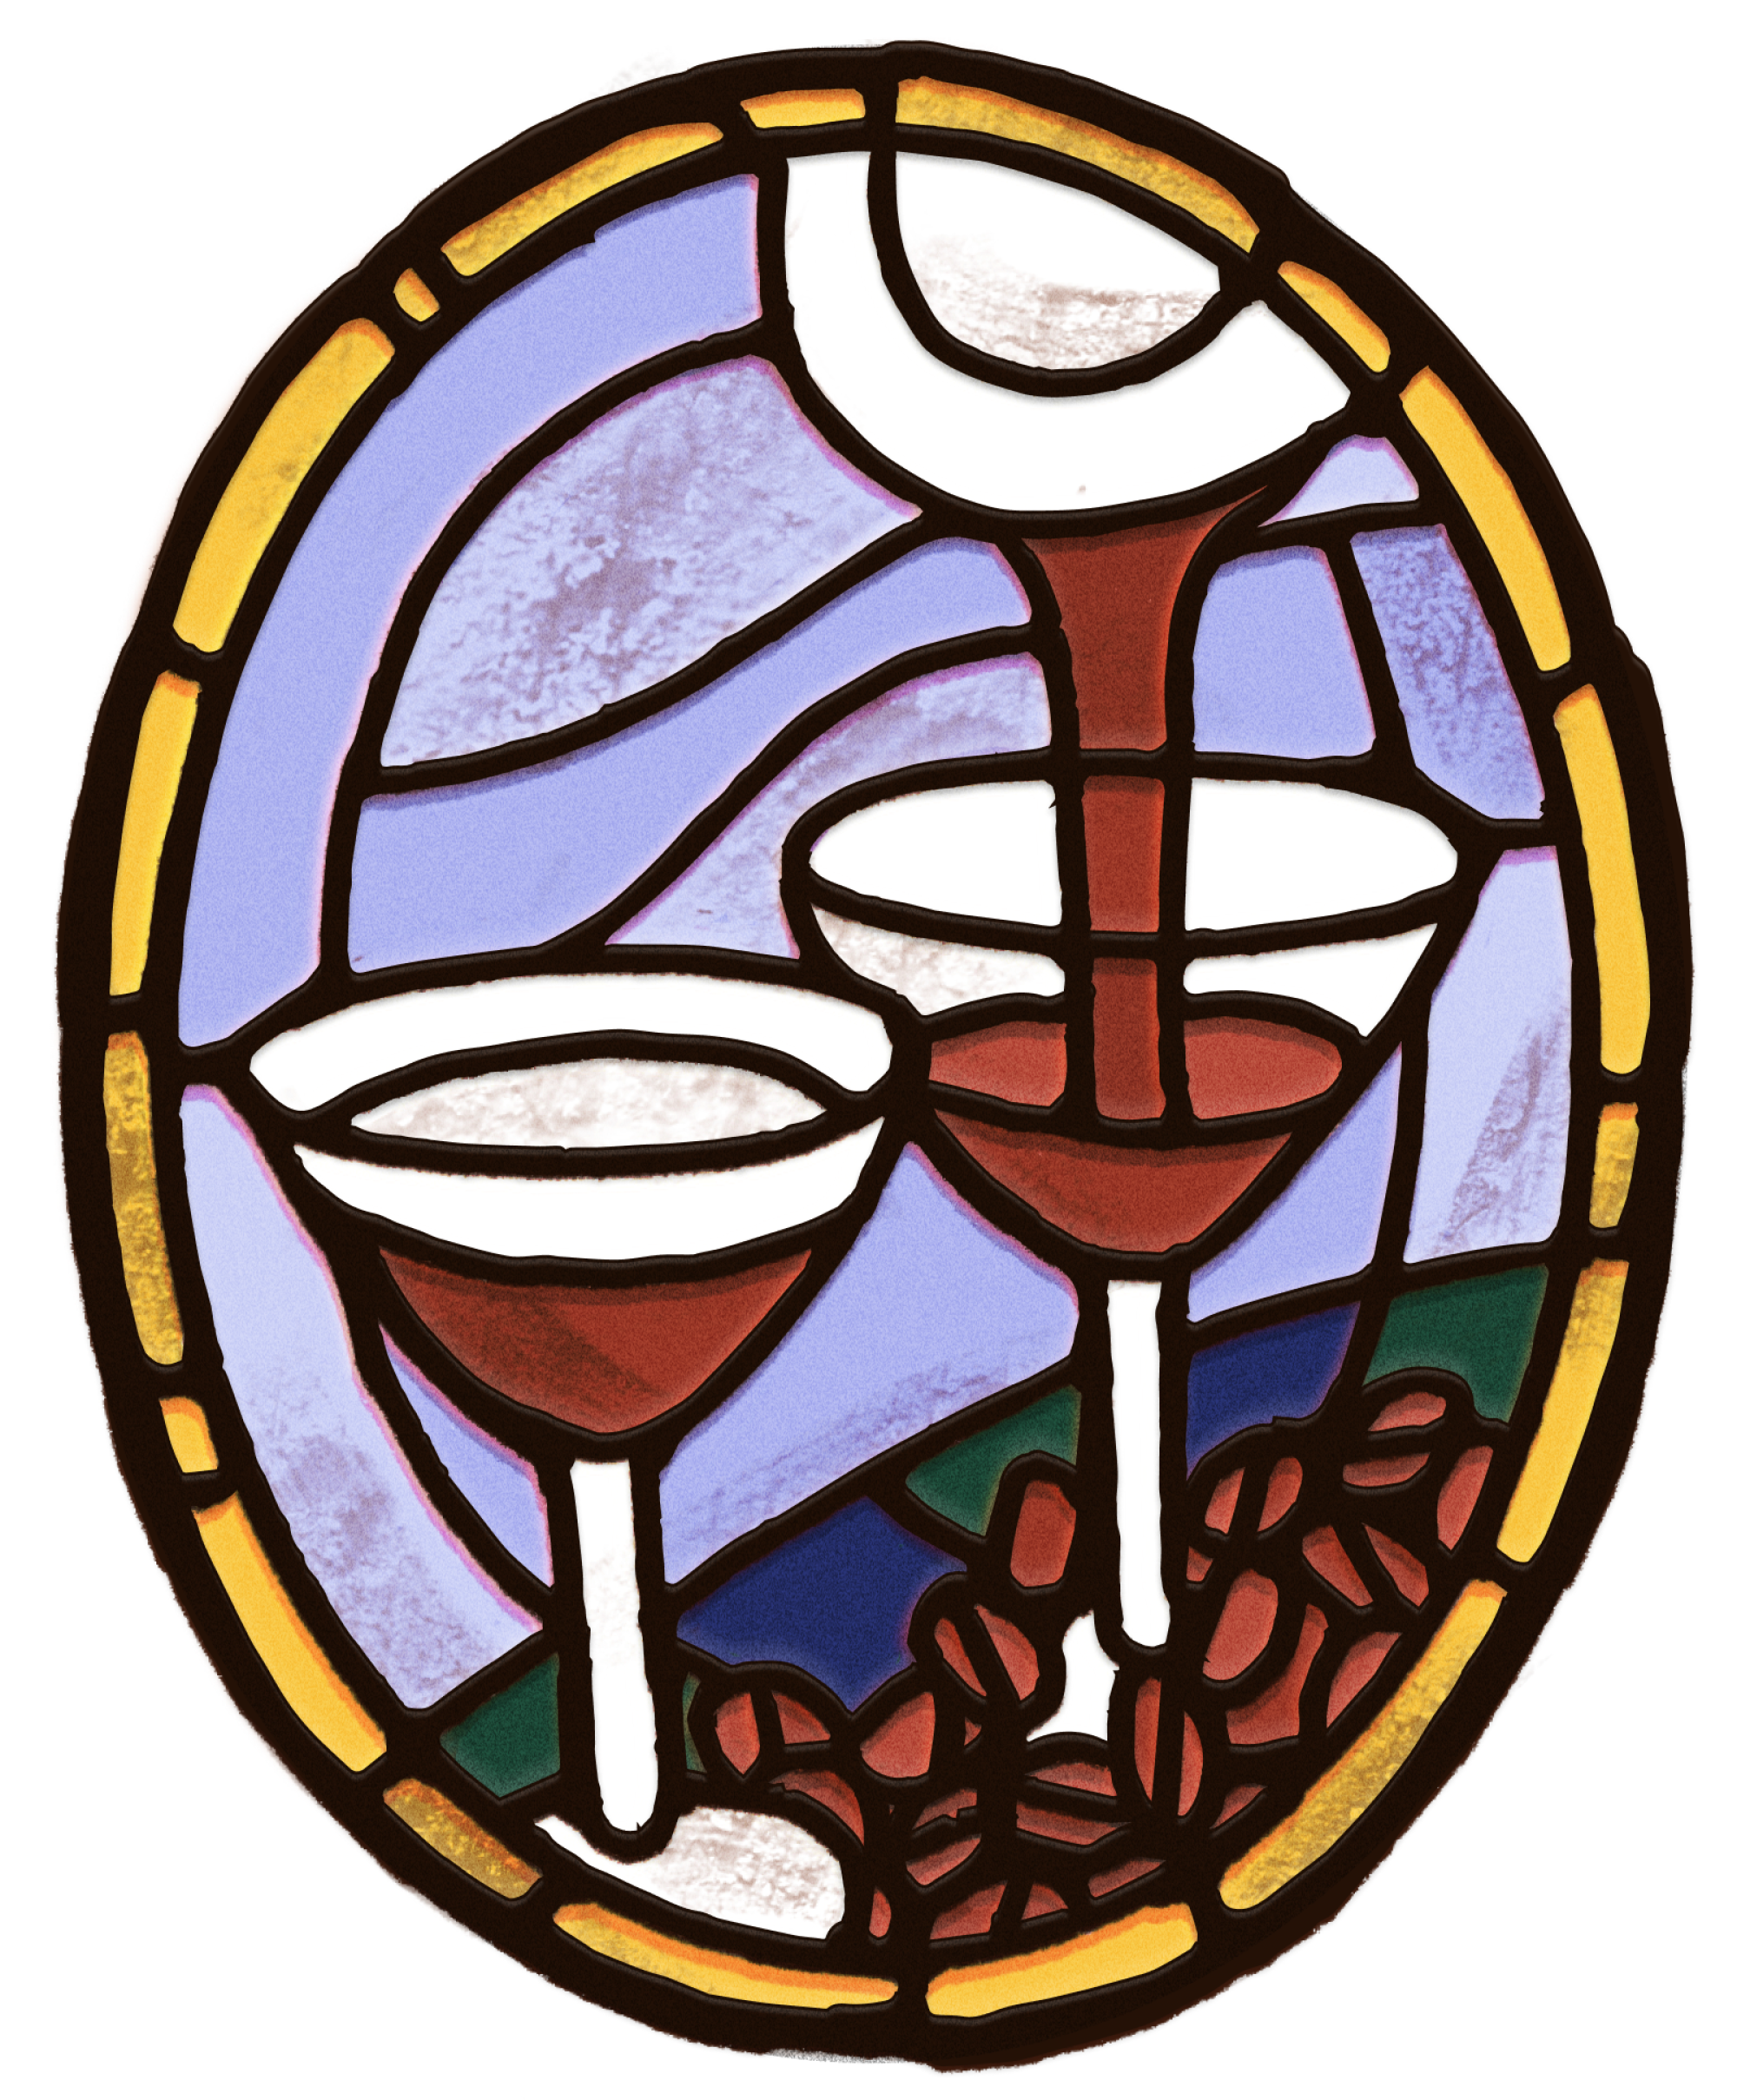 An illustration in stained-glass style of pouring an espresso martini into two glasses